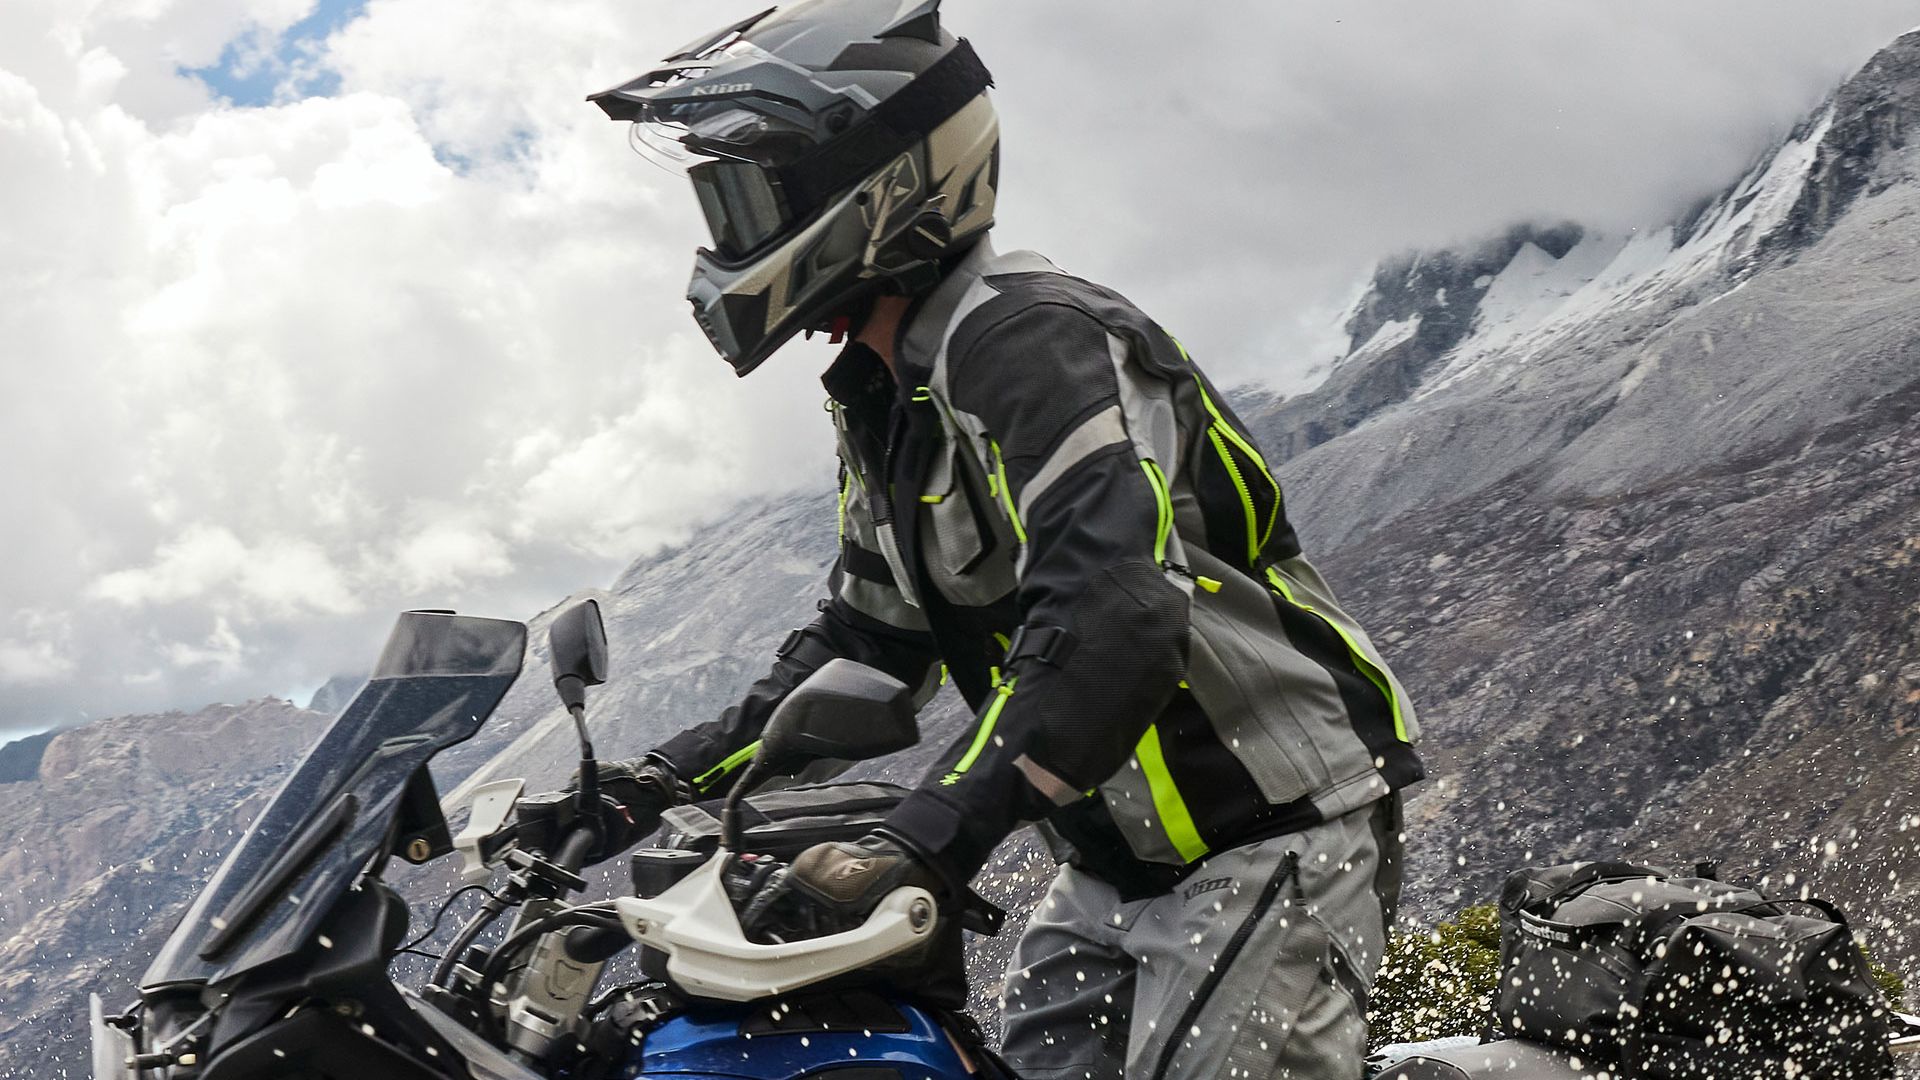 Adventure Motorcycle Jackets For All-Terrain Protection, 52% OFF